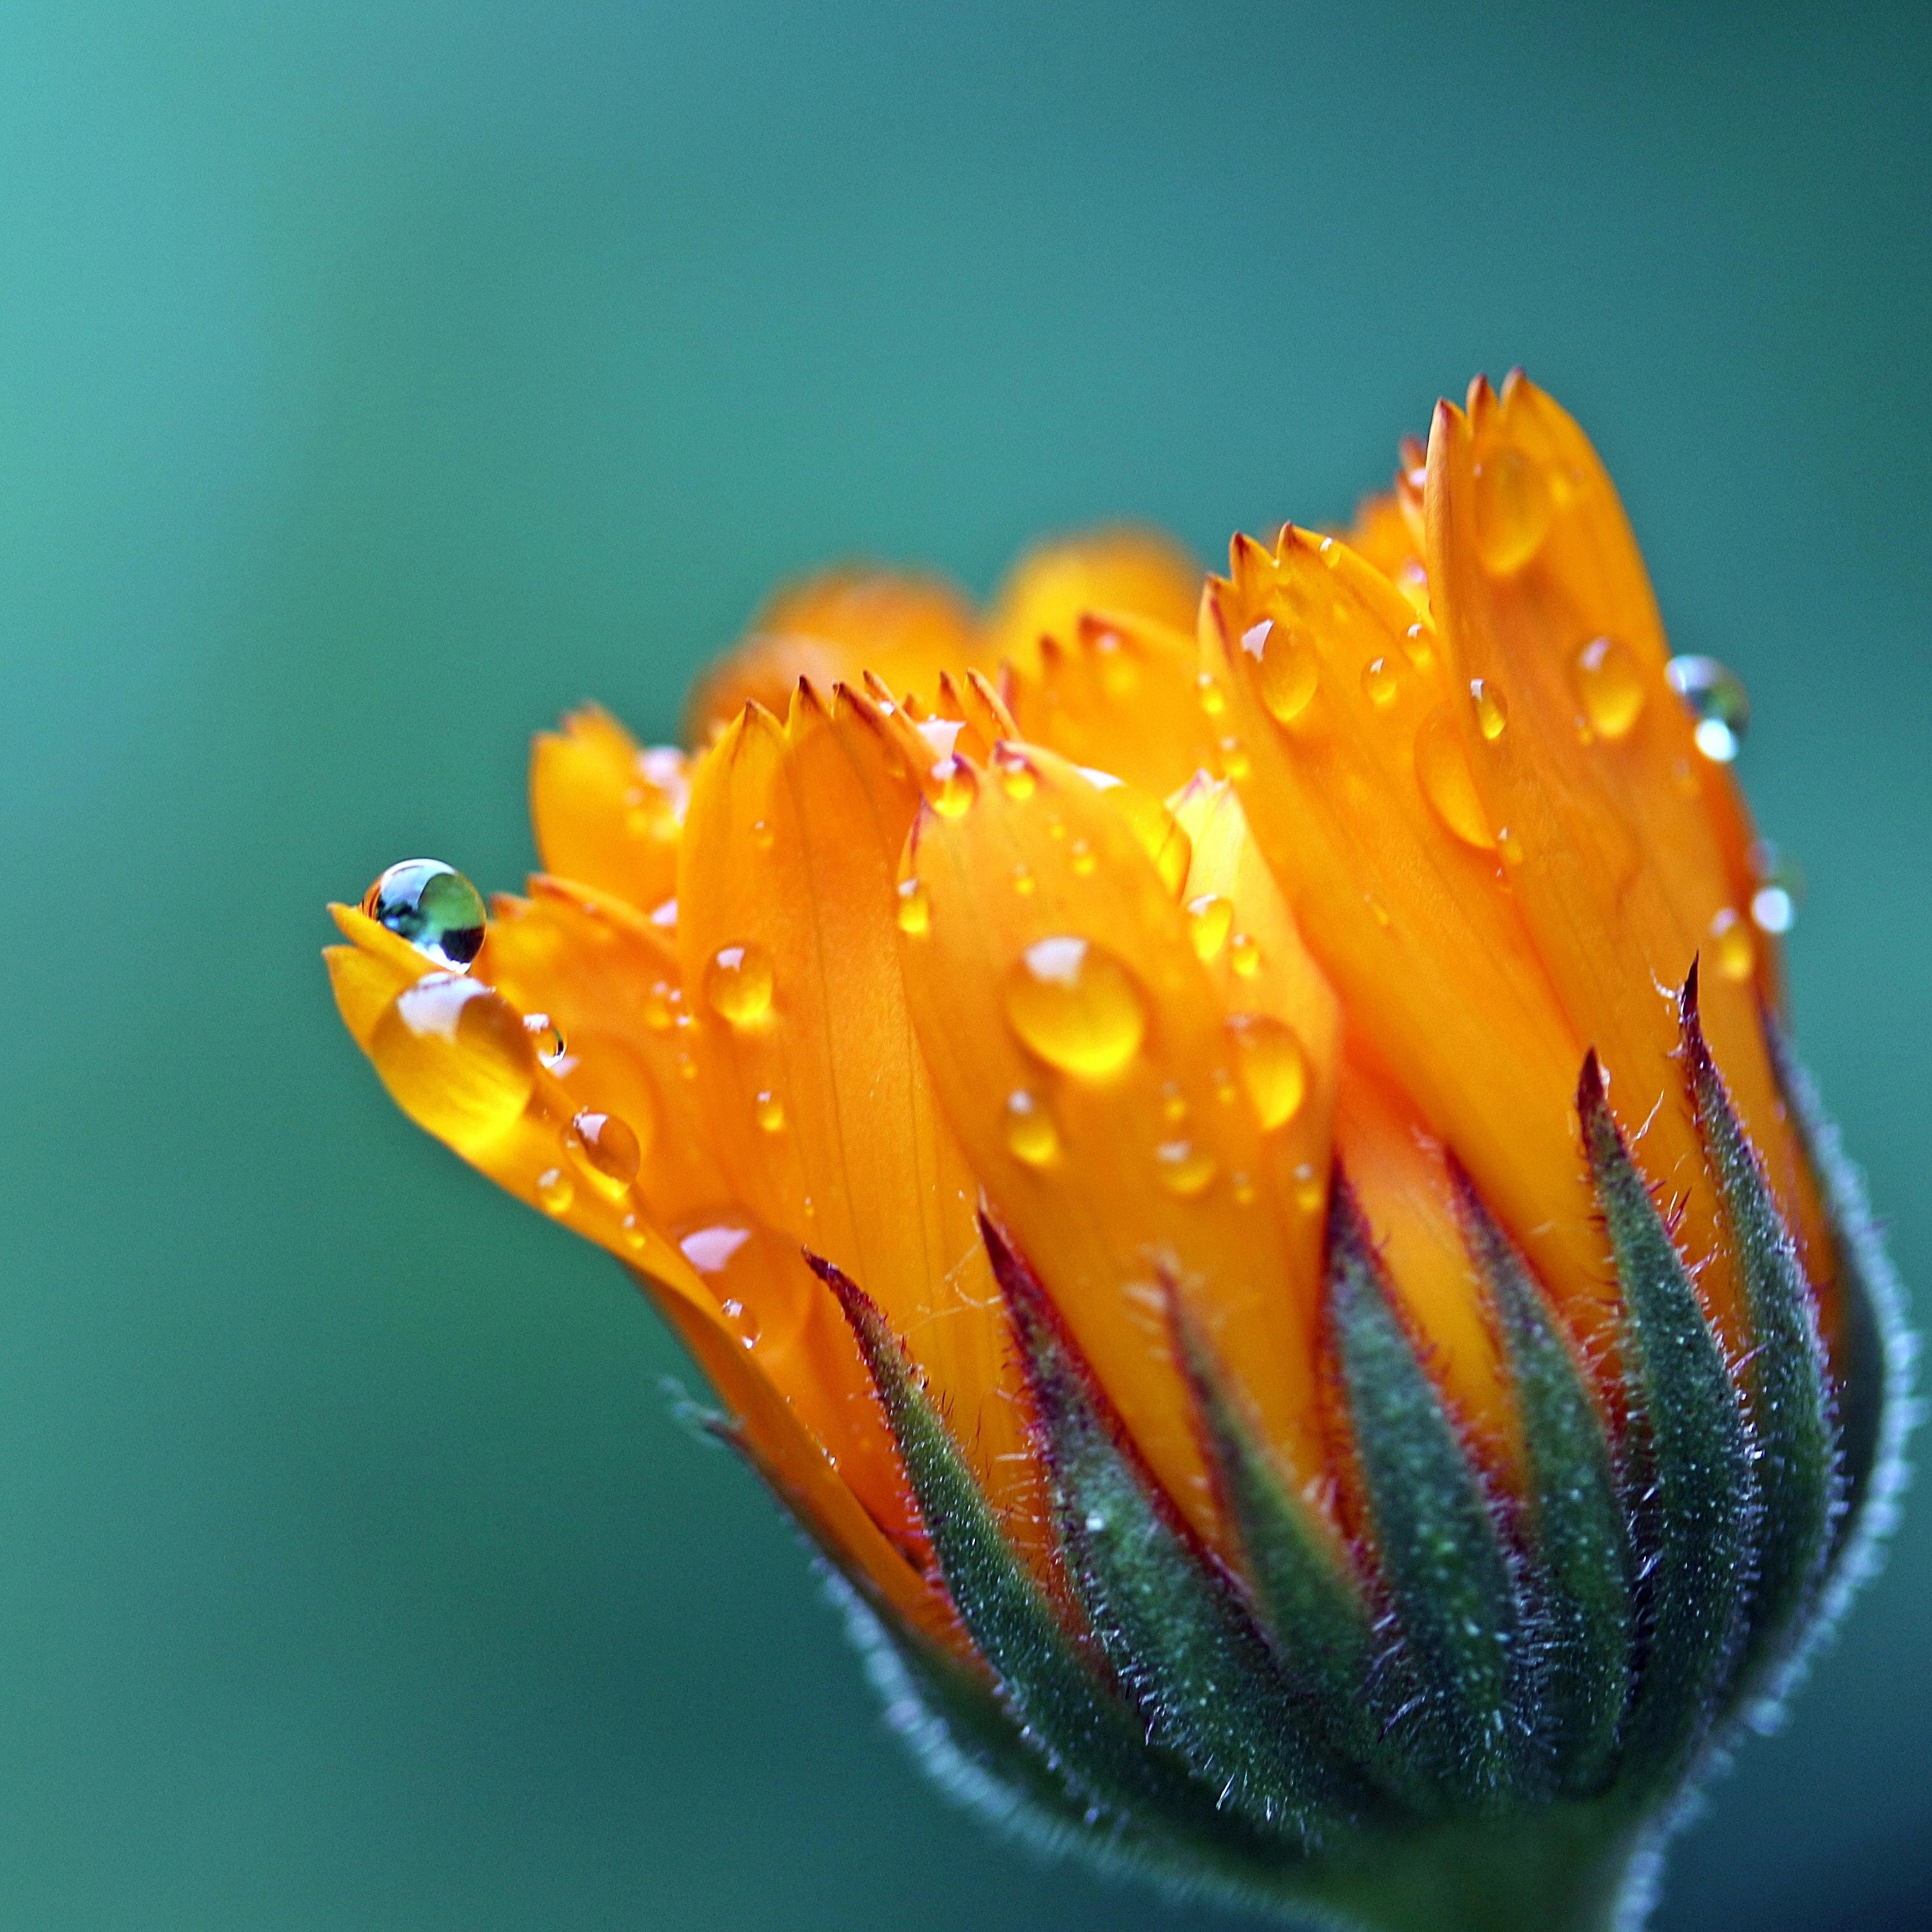 20 Timeless Nature Rain Sounds to Relax & Deeply Focus